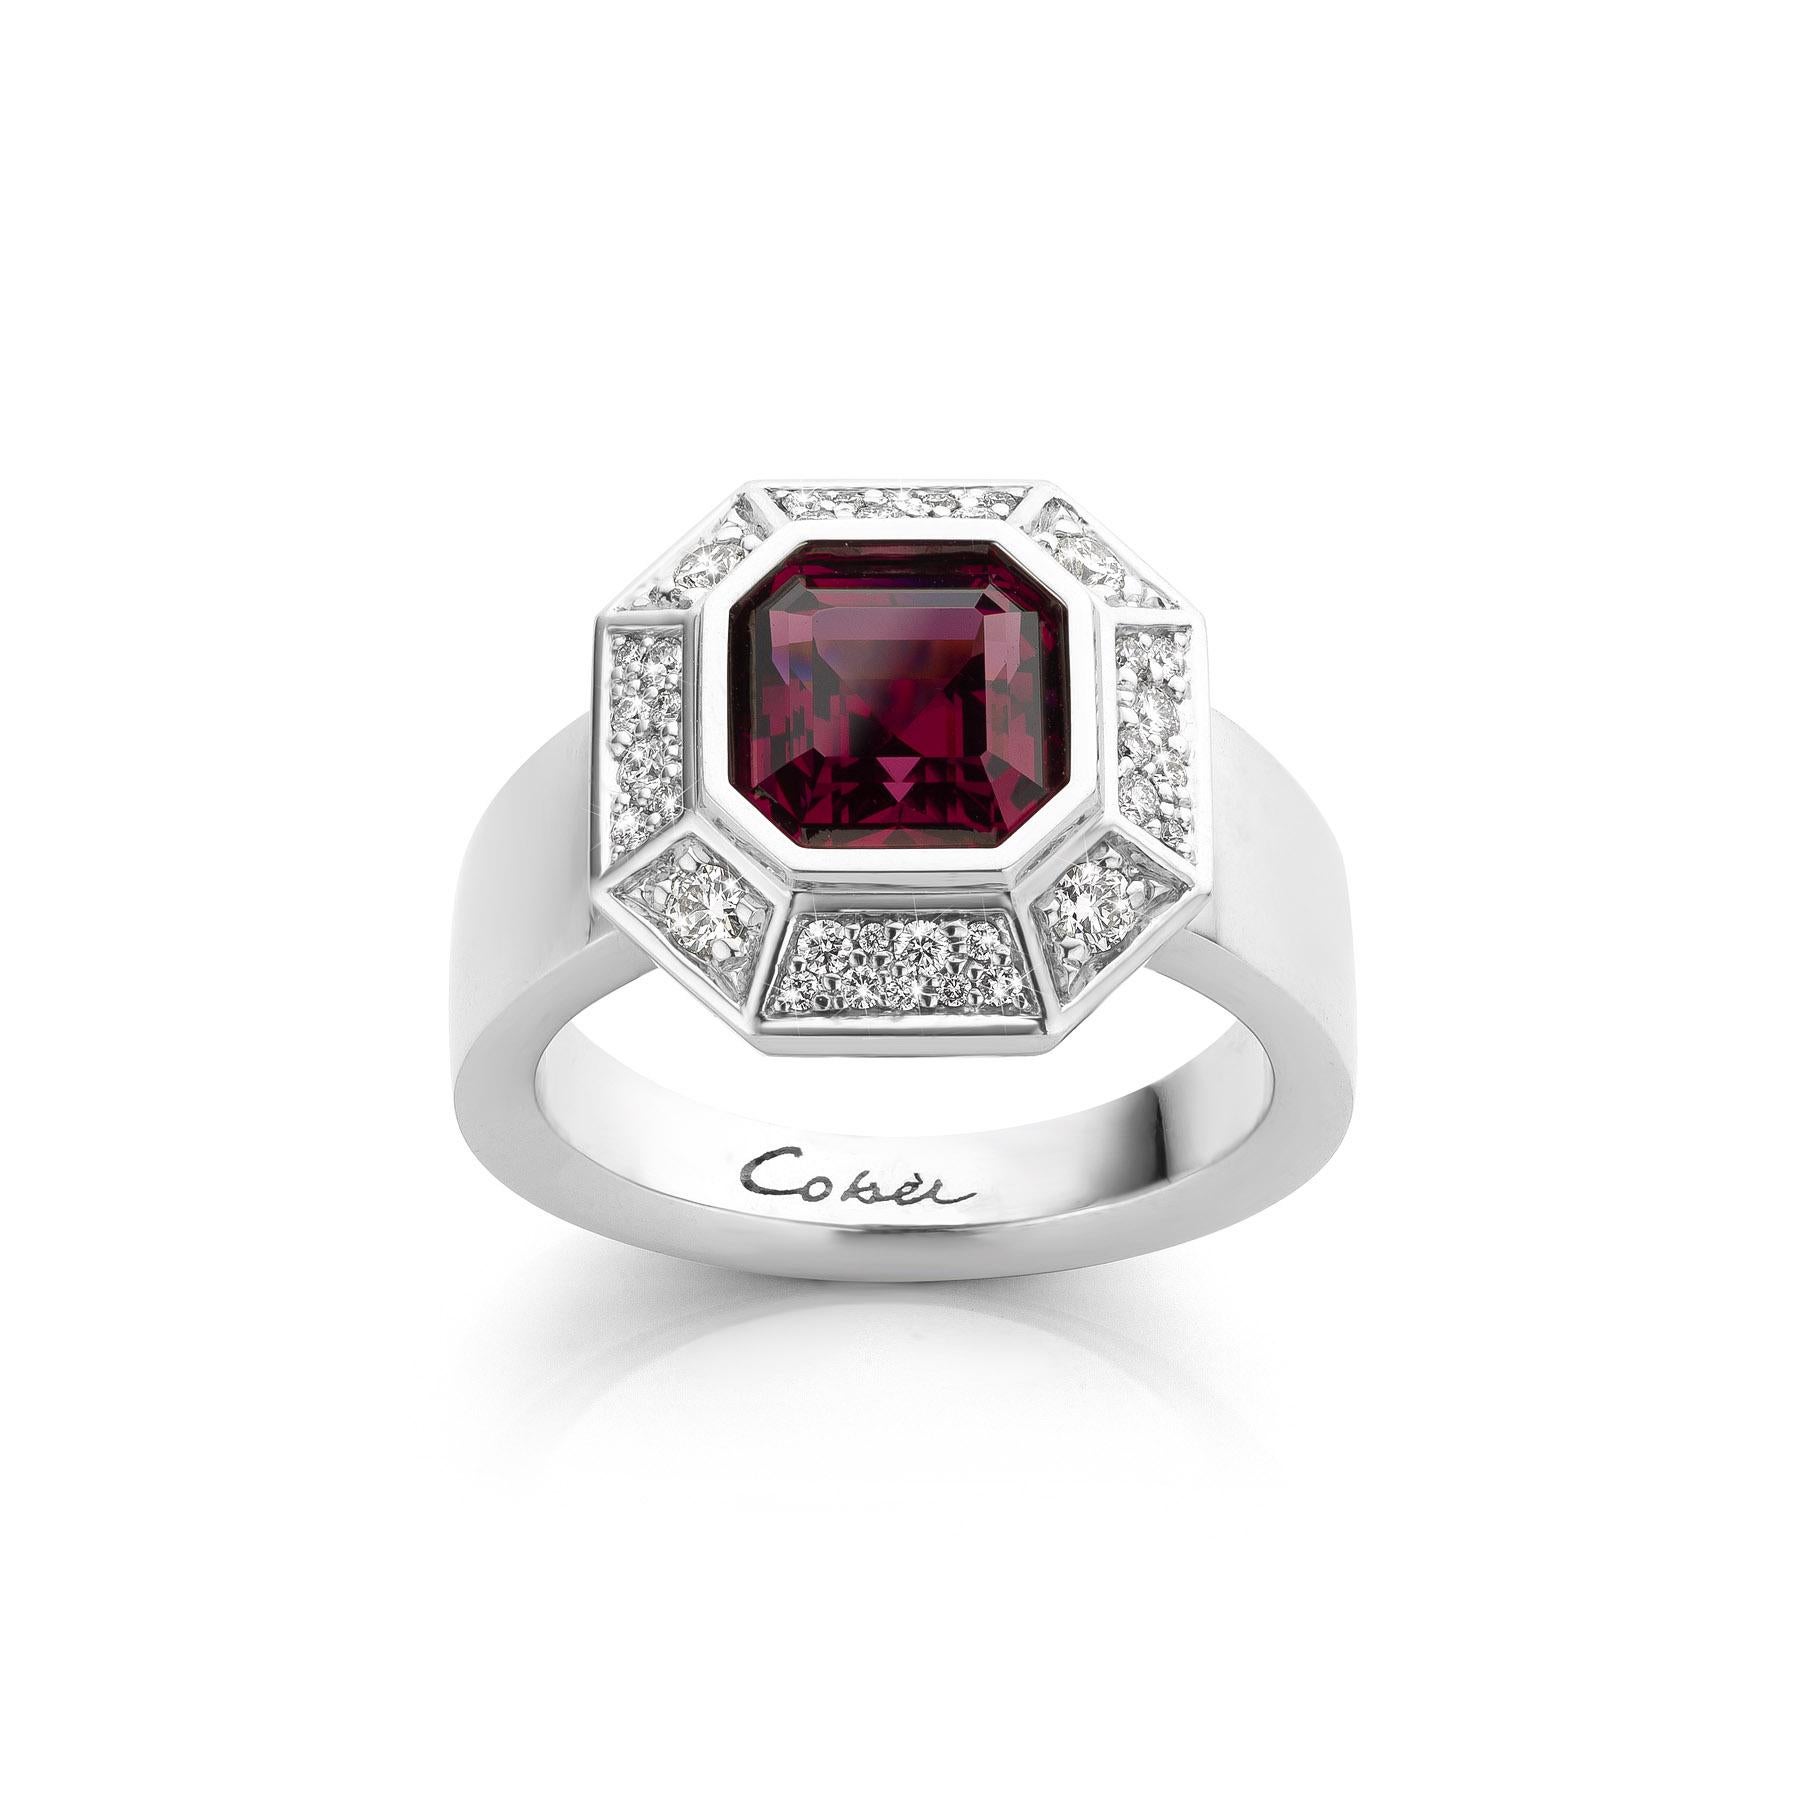 For Sale:  Cober “Catharina” 18K white gold ring with a Asscher-cut Garnet and 30 Diamonds 3